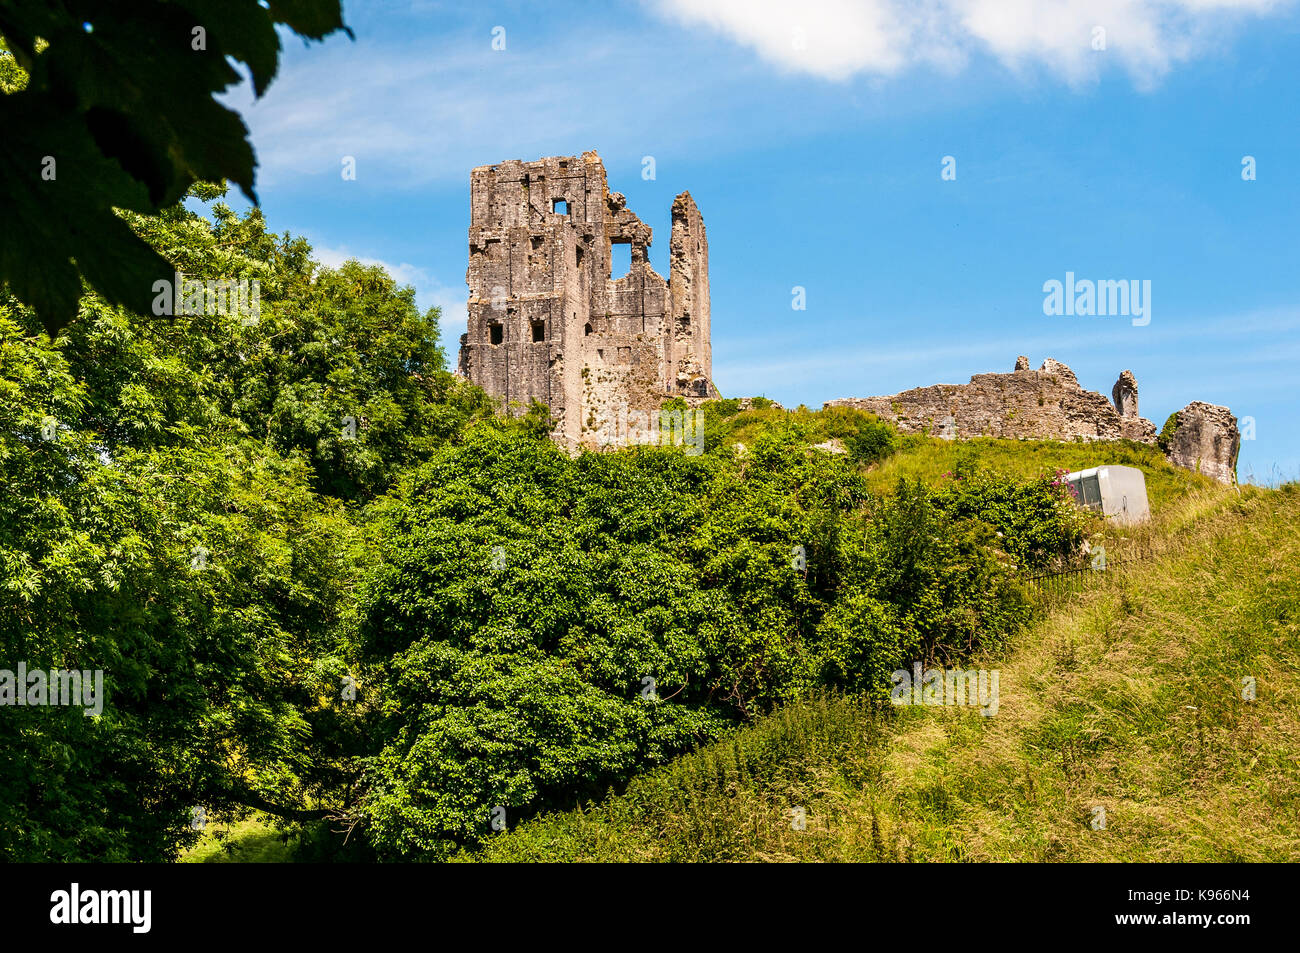 The Keep of the romantic ruins of ancient Corfe Castle standing above a fallen tower and walls on a hilltop above a grassy and wooded steep slope Stock Photo